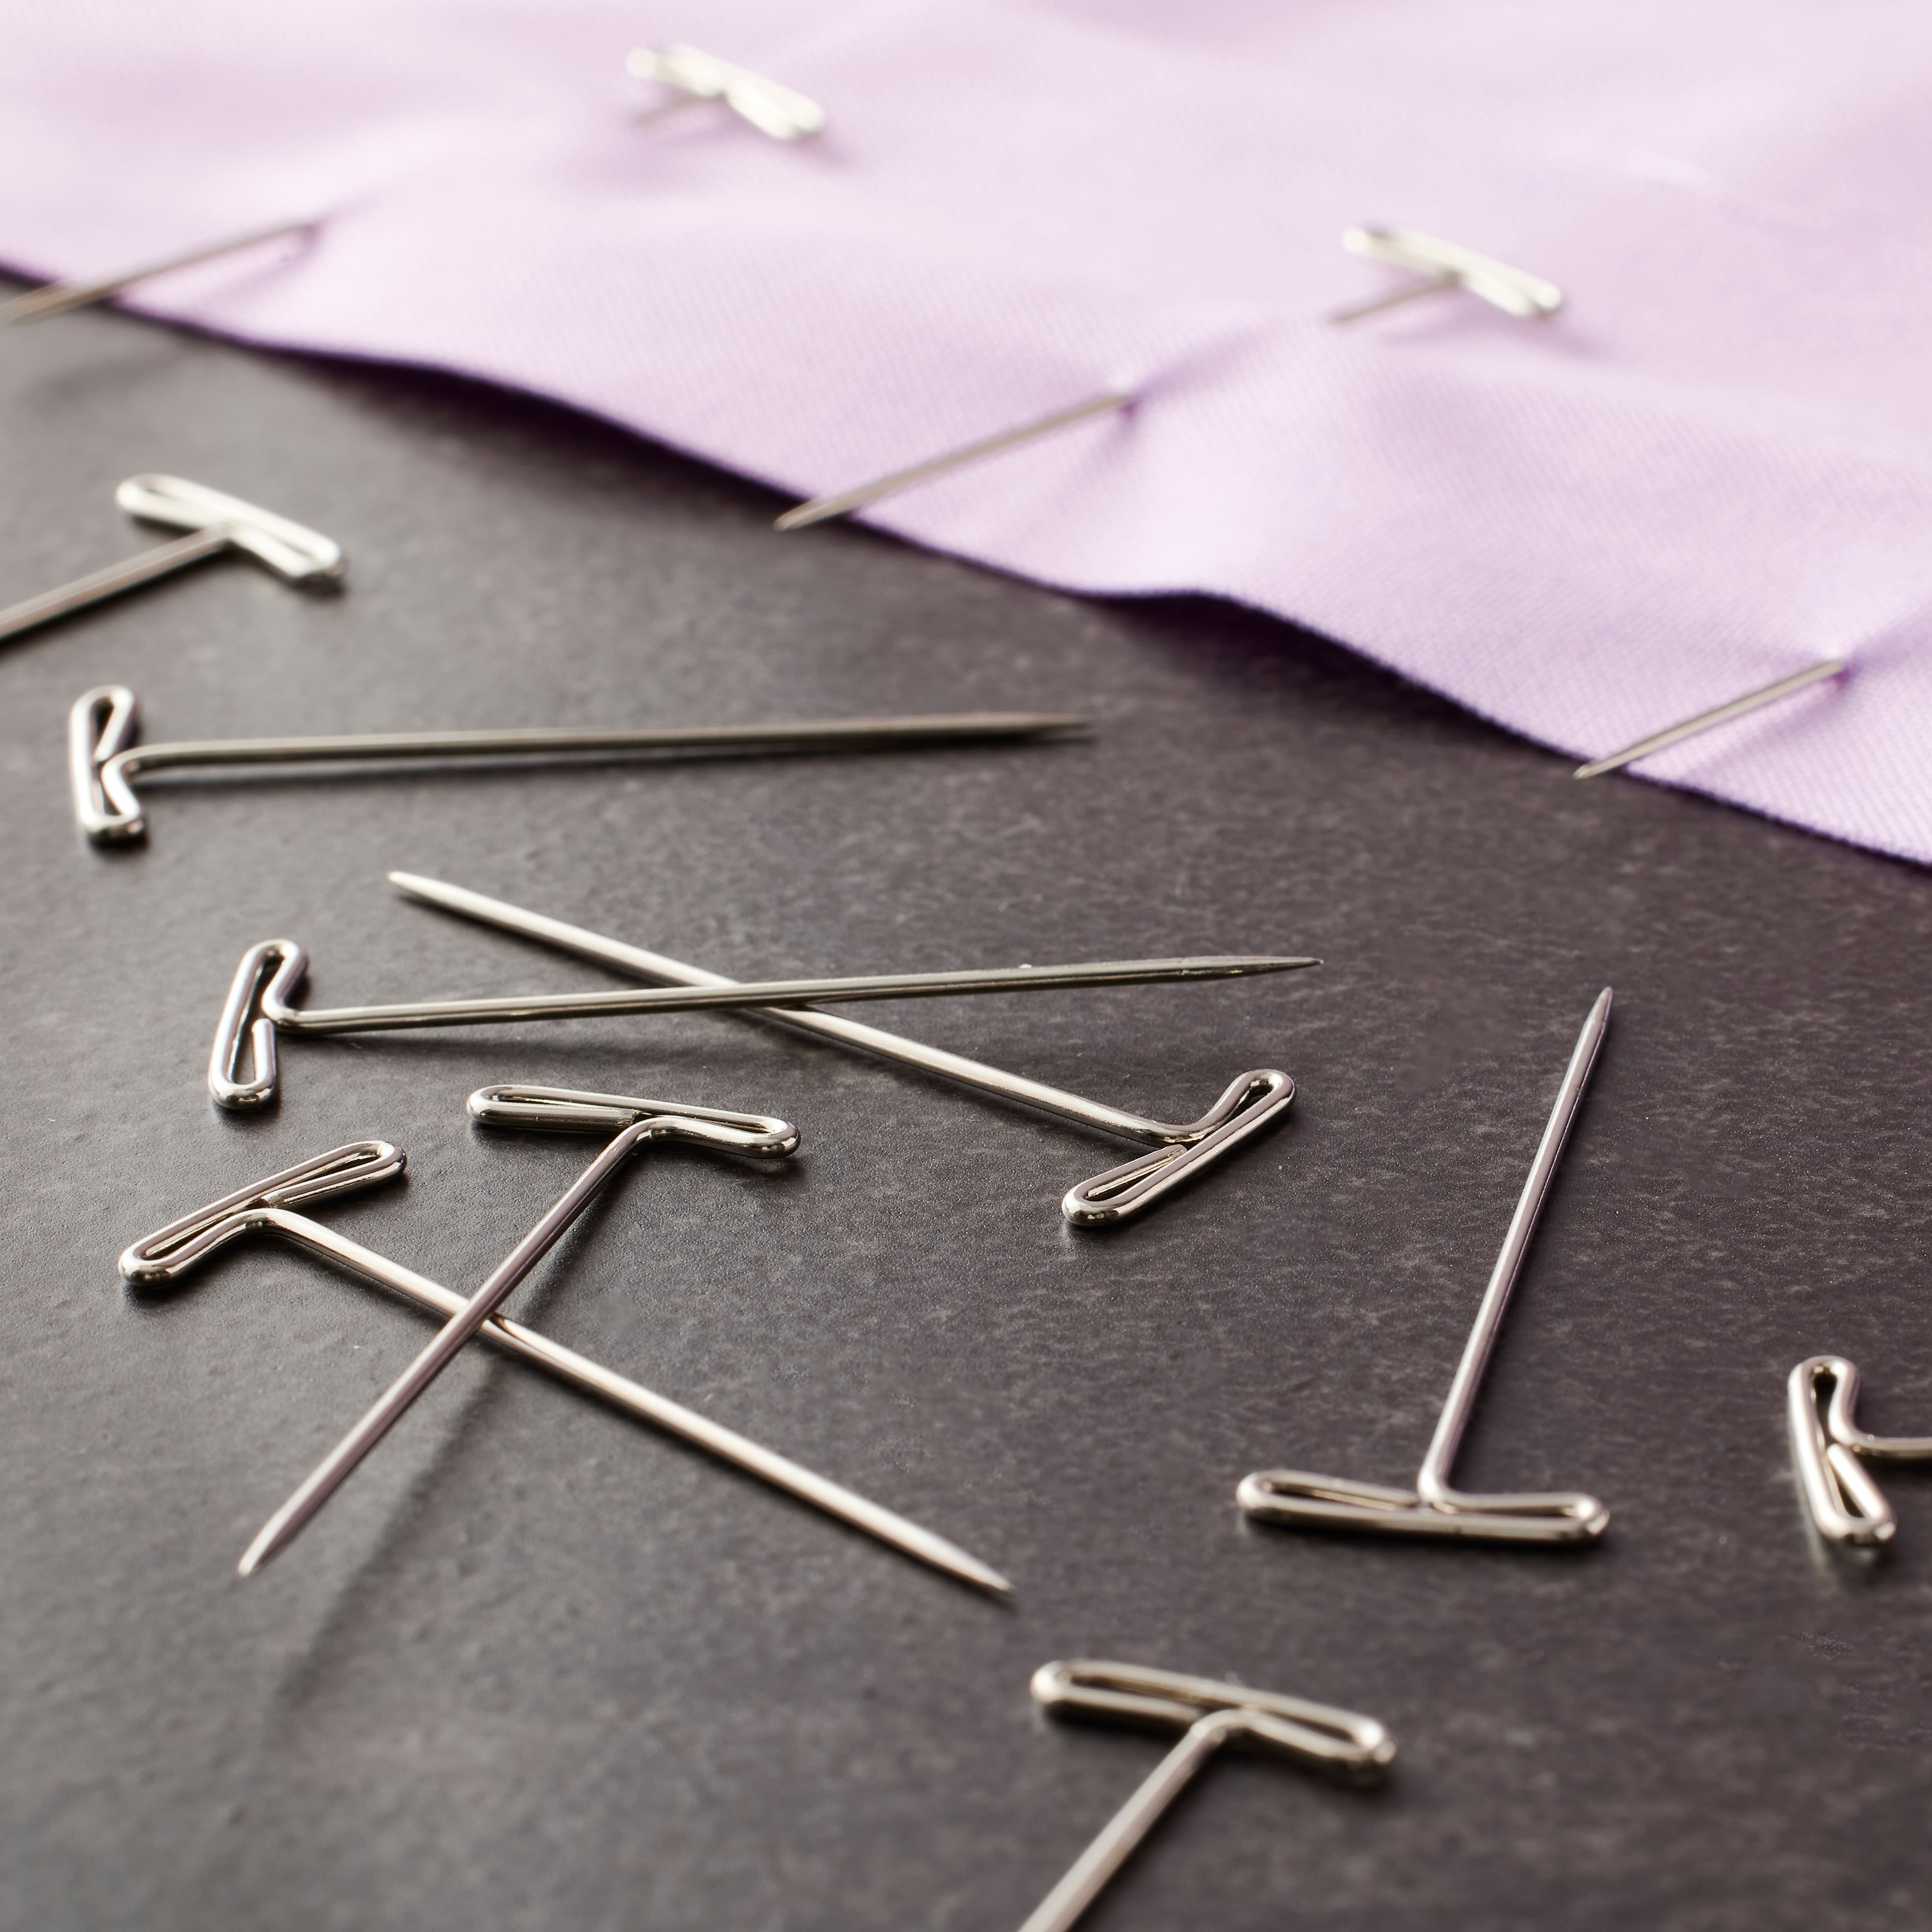 Loops &#x26; Threads&#x2122; Quilter&#x27;s T-Pins, 1 3/4&#x22;